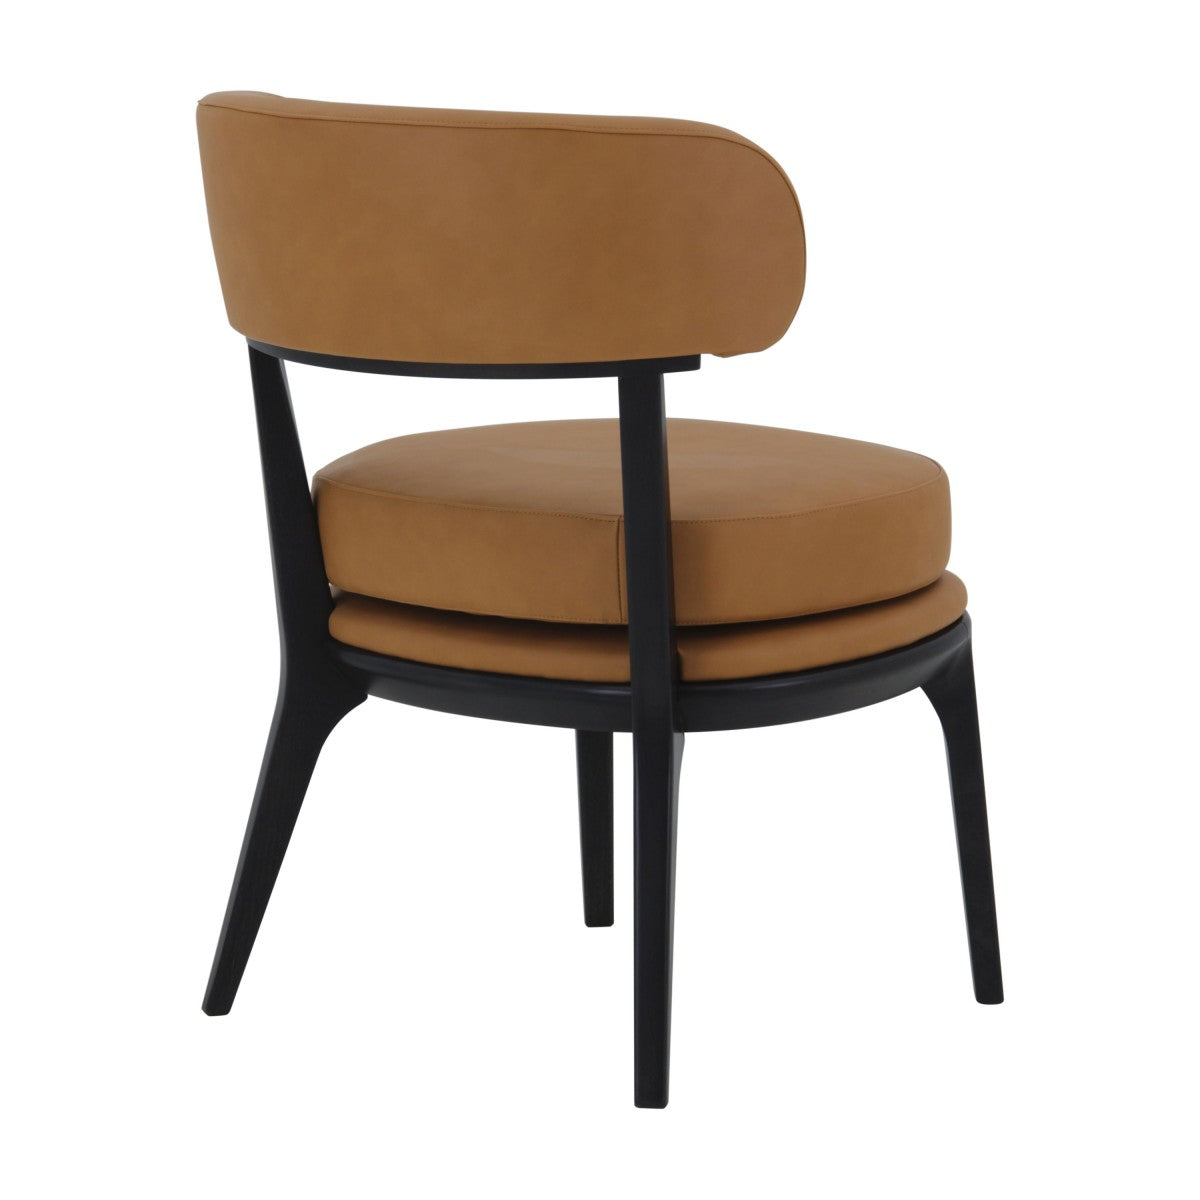 Alide Bespoke Upholstered Modern Contemporary Dining Chair MS639S Custom Made To Order